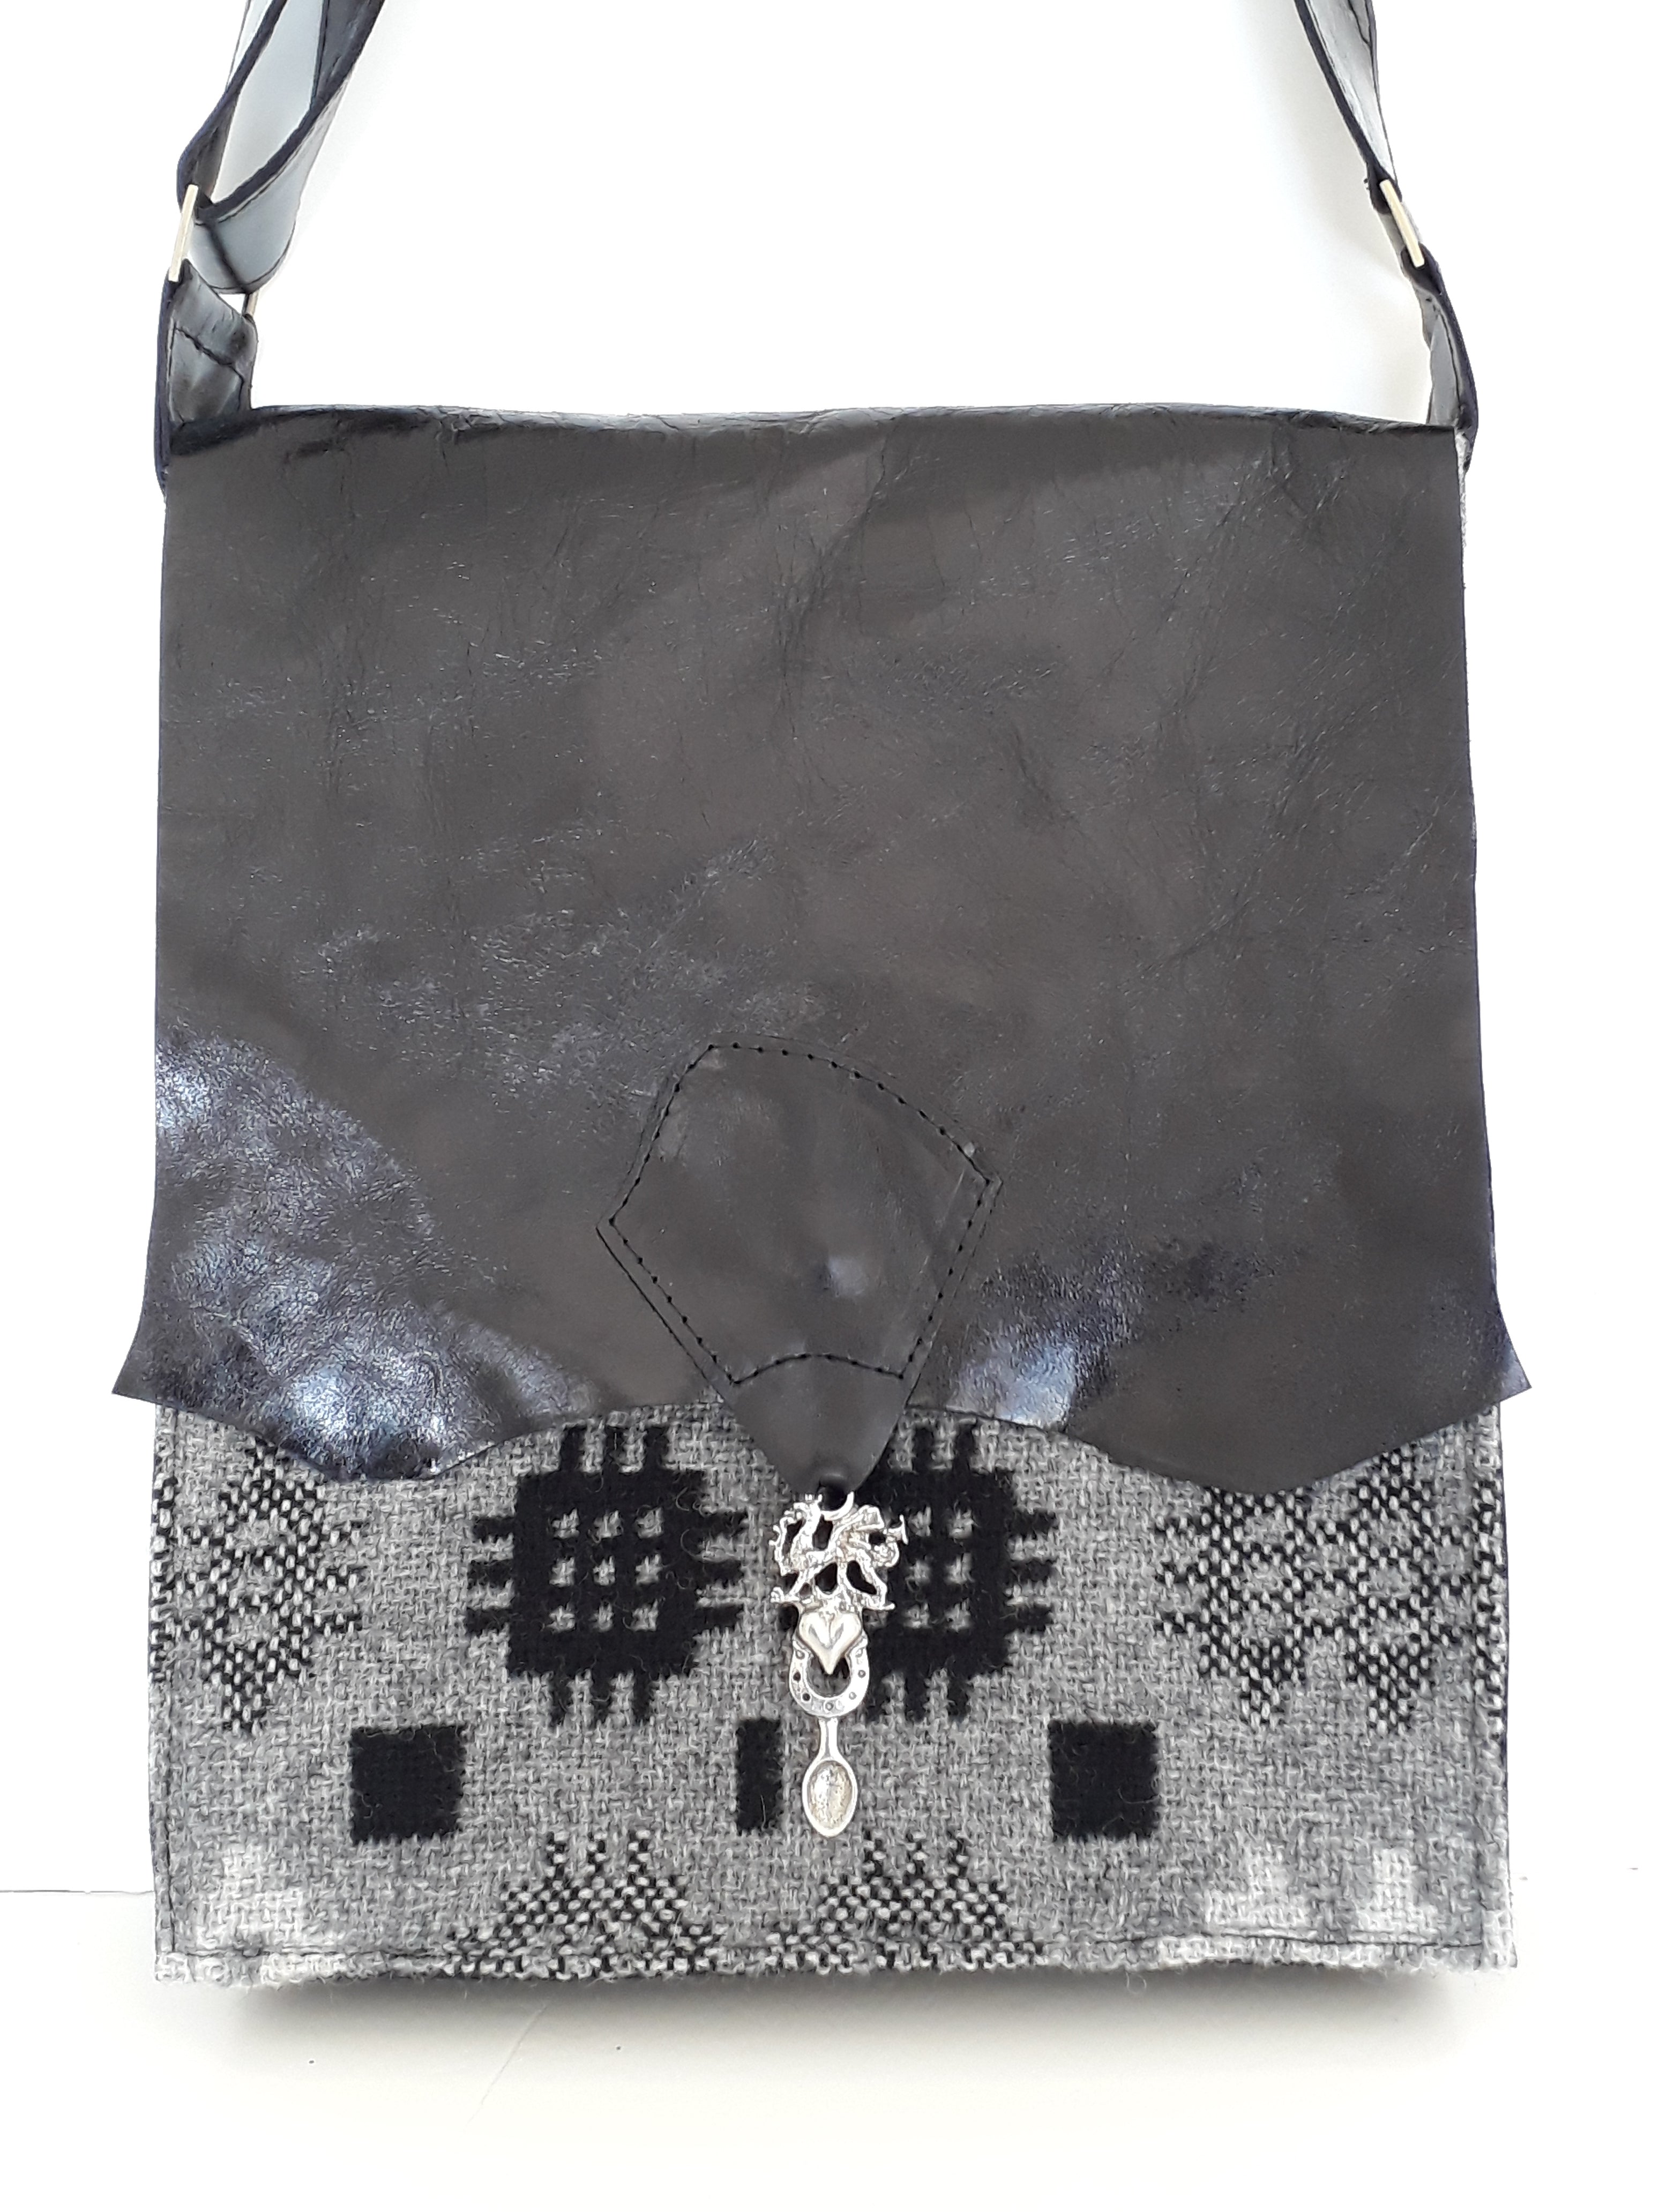 Raw Edge Leather & Welsh Wool Bag with Pewter Lovespoon Detail - Black & Grey - Coterie Leather Bags